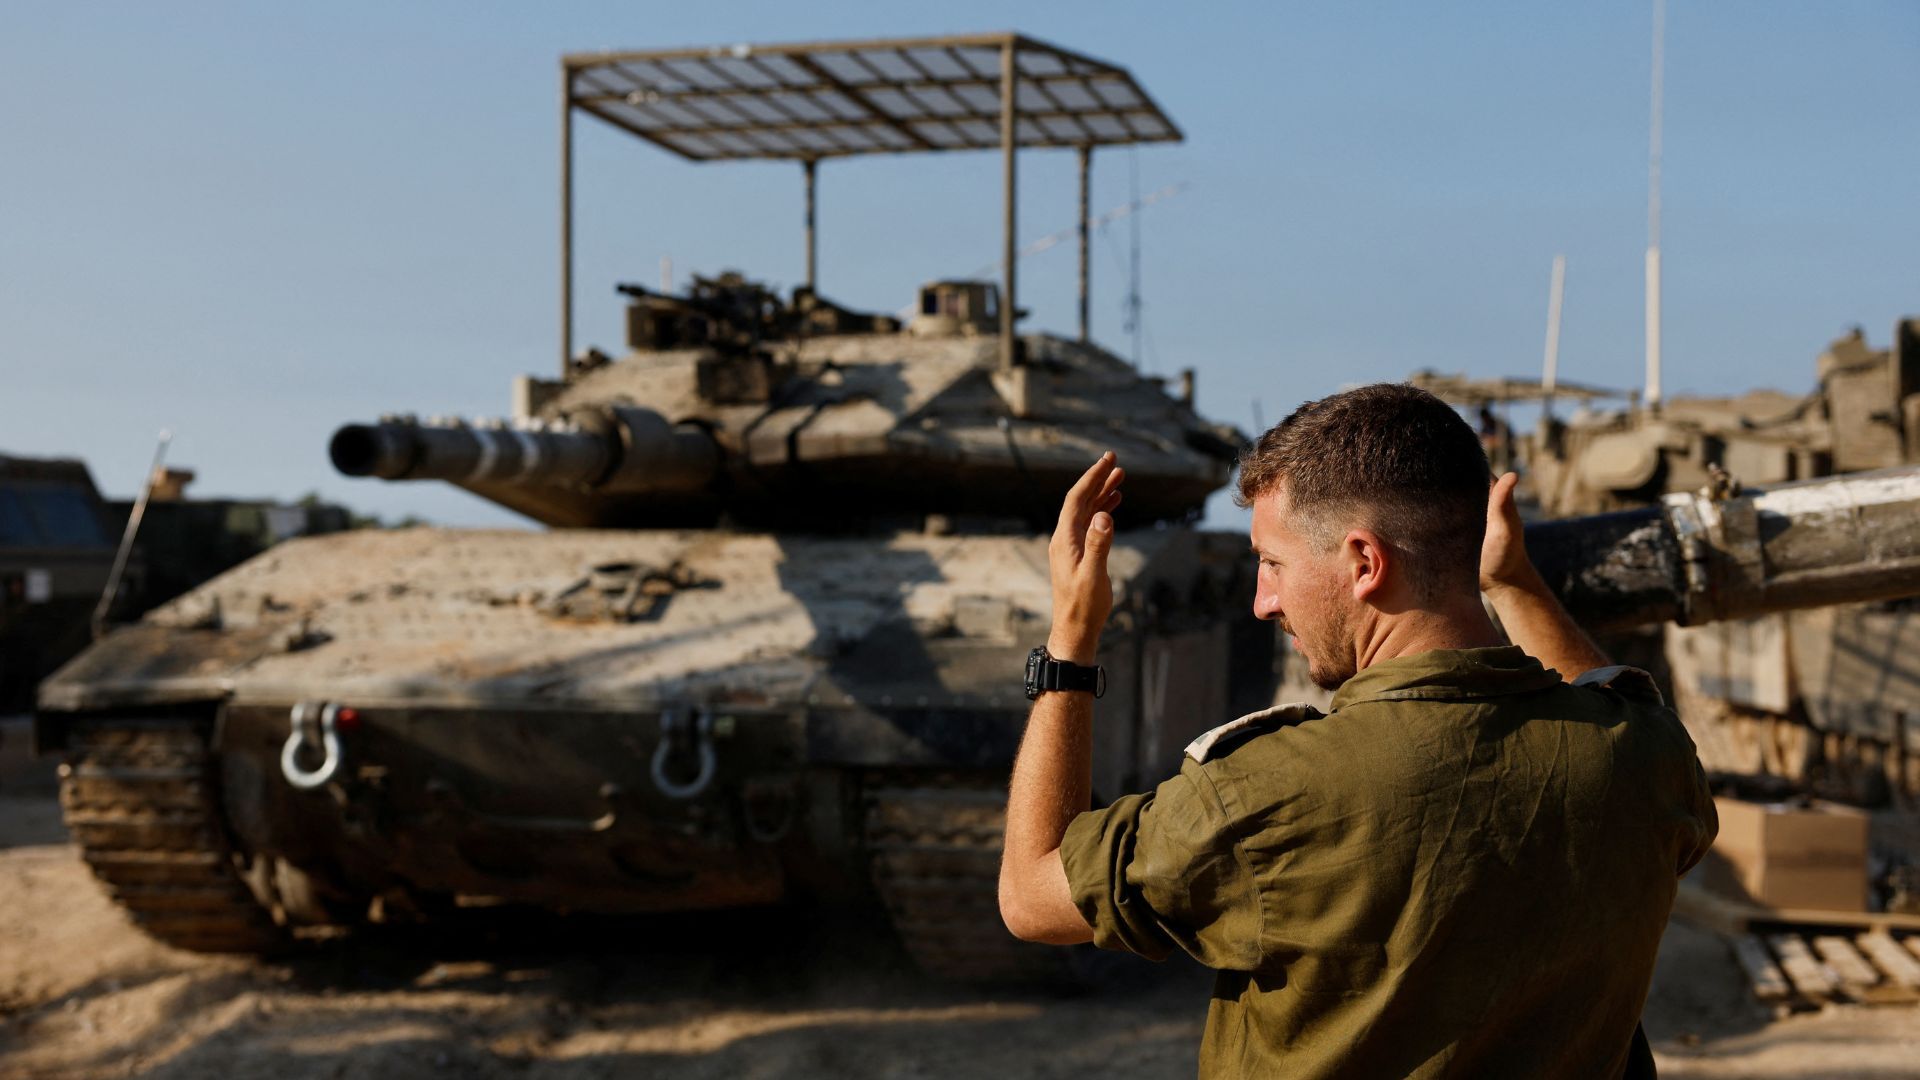 Is Israel’s Gaza War the most destructive yet with conventional weapons? | Israel-Palestine conflict #Israels #Gaza #War #destructive #conventional #weapons #IsraelPalestine #conflict